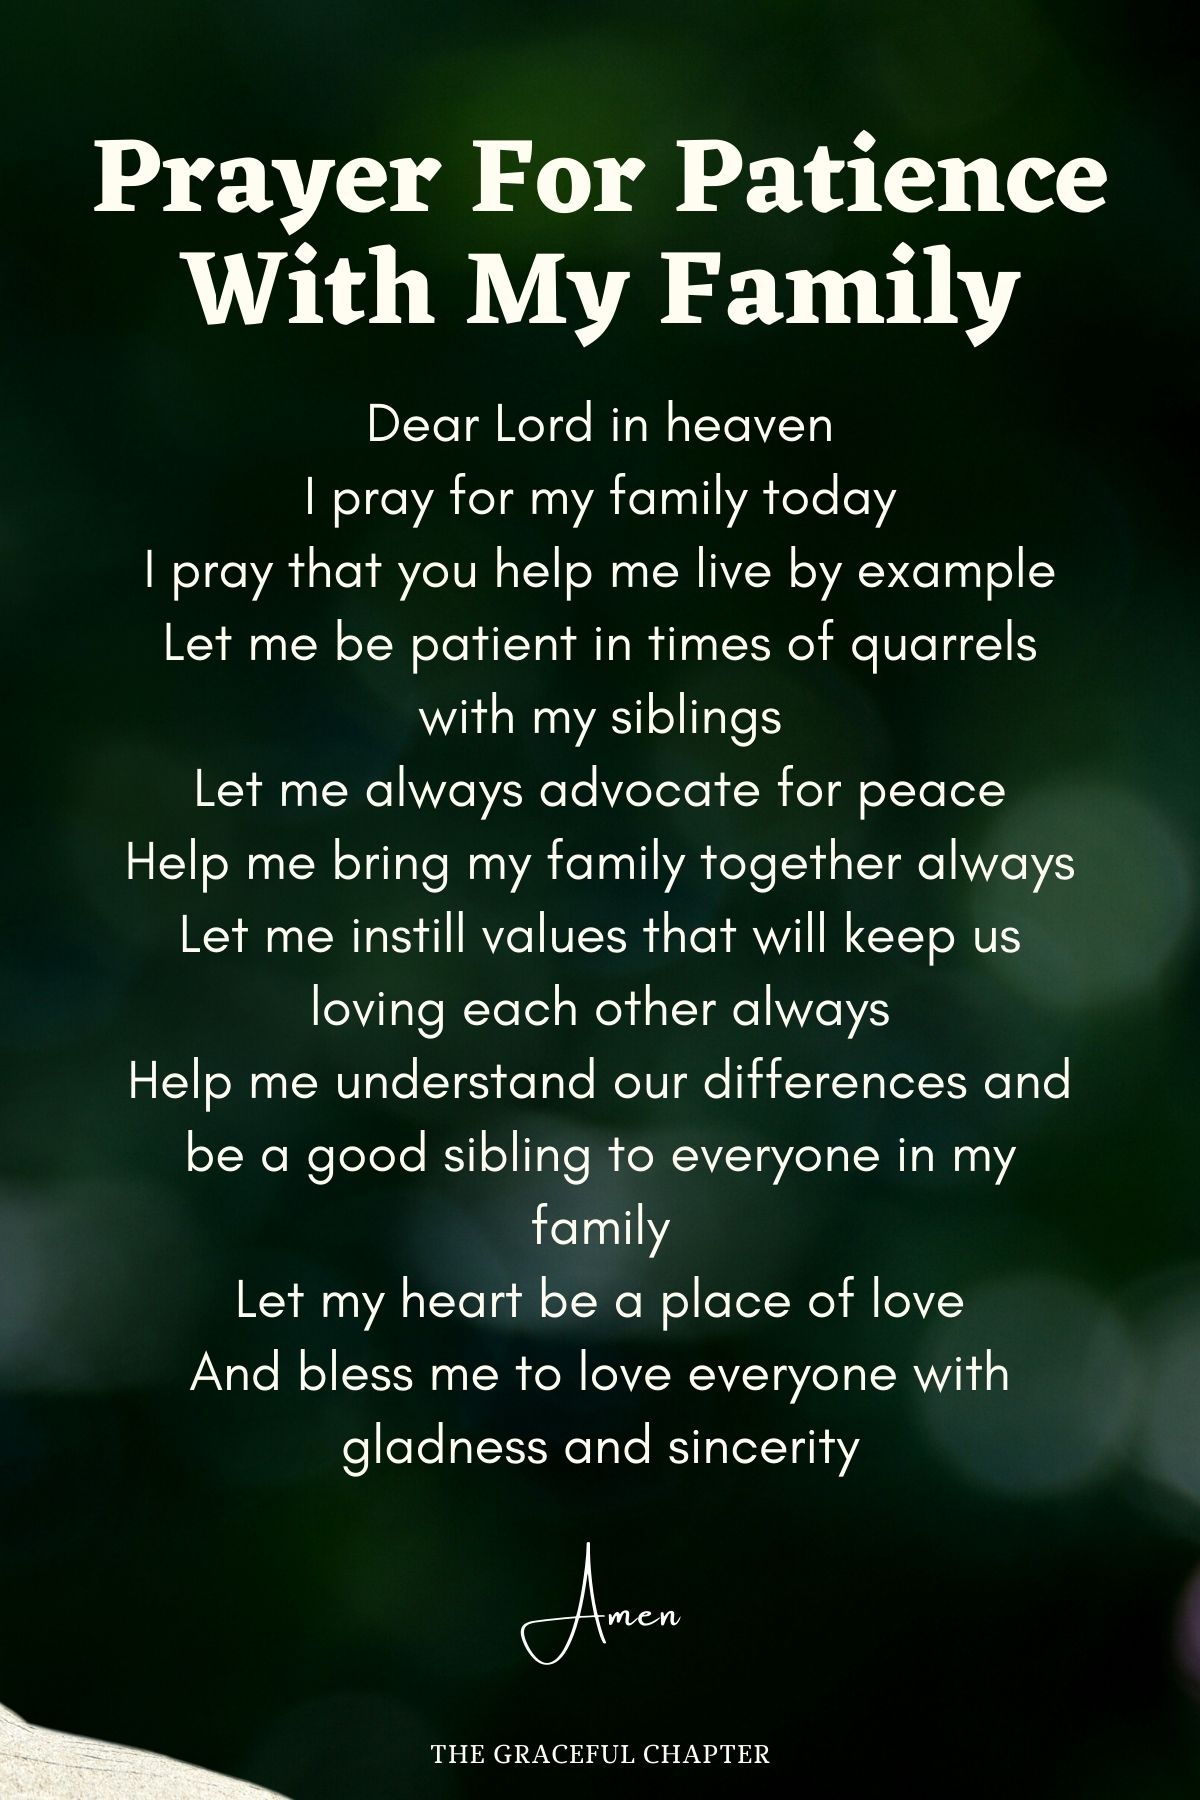 Prayer for patience with my family